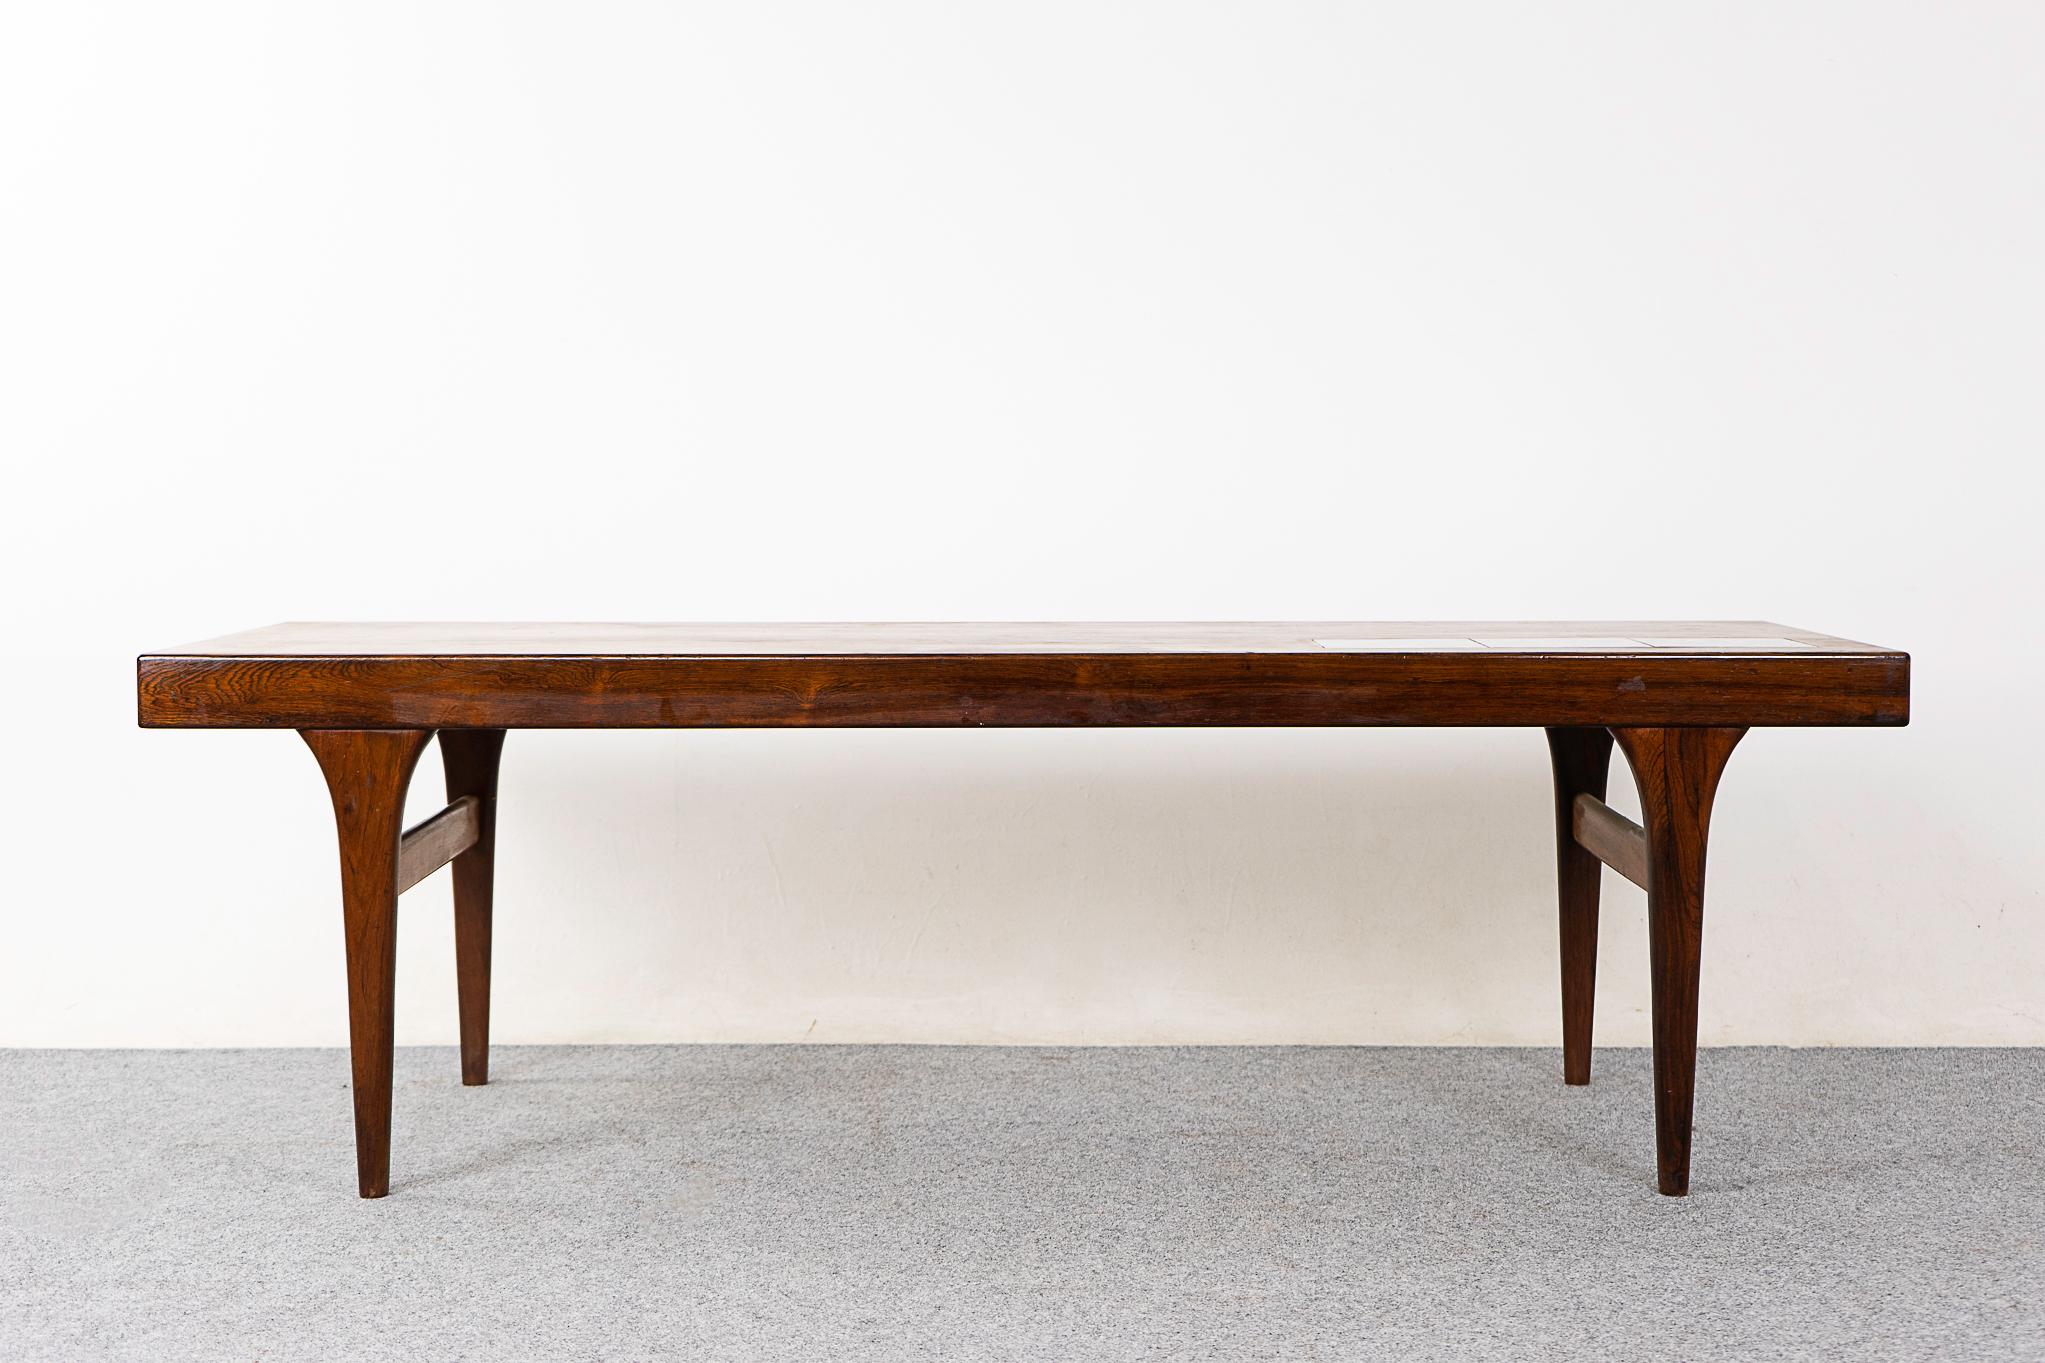 Rosewood mid-century coffee table designed by Johannes Andersen for CFC Silkeborg, circa 1960's. Beautiful book matched veneer on the top and a solid wood curved edge along its length. The ceramic tiles are an ideal spot for placing your beverage!